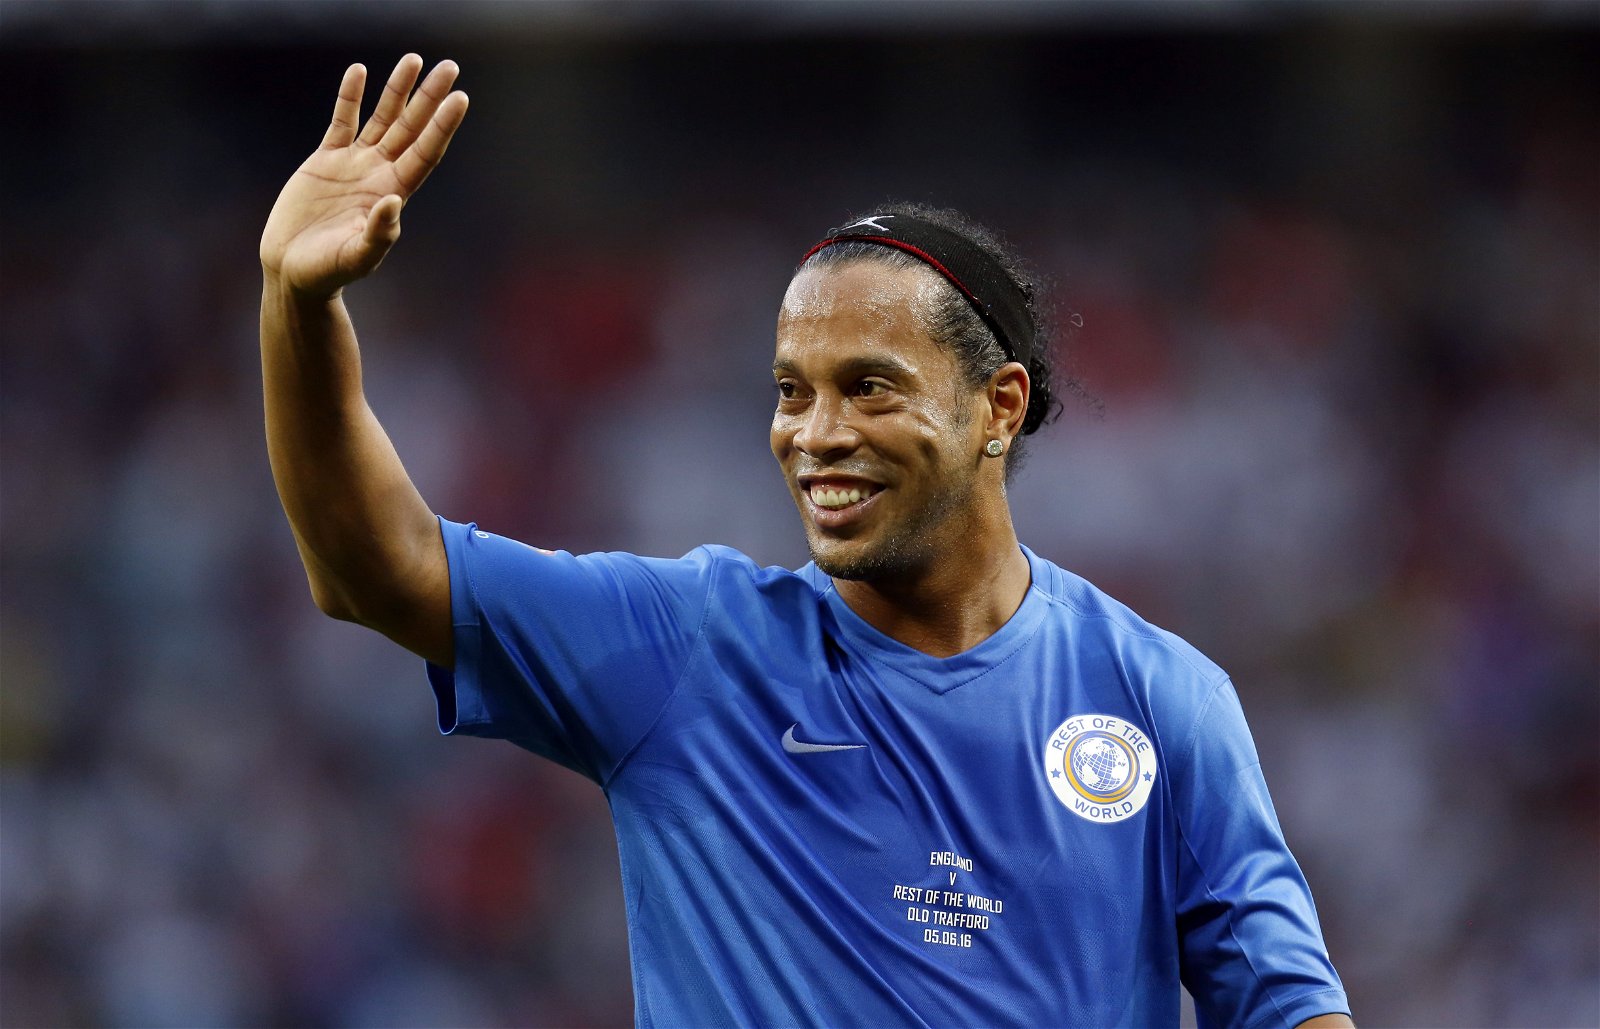 Top 5 Football Legends We Wish Would Play Forever